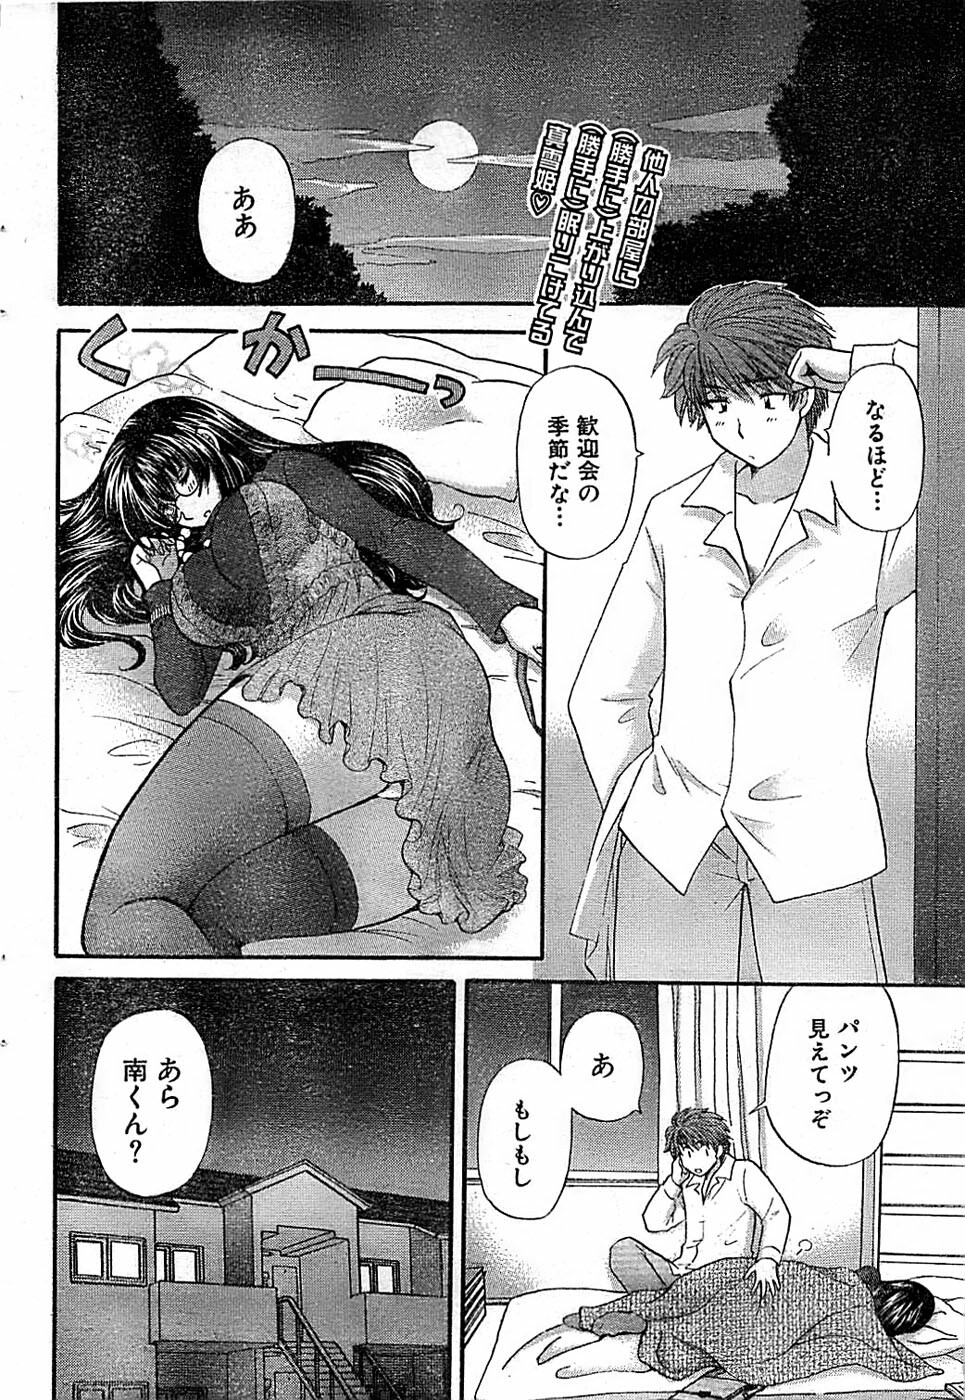 Doki! Special 2006-04 page 38 full